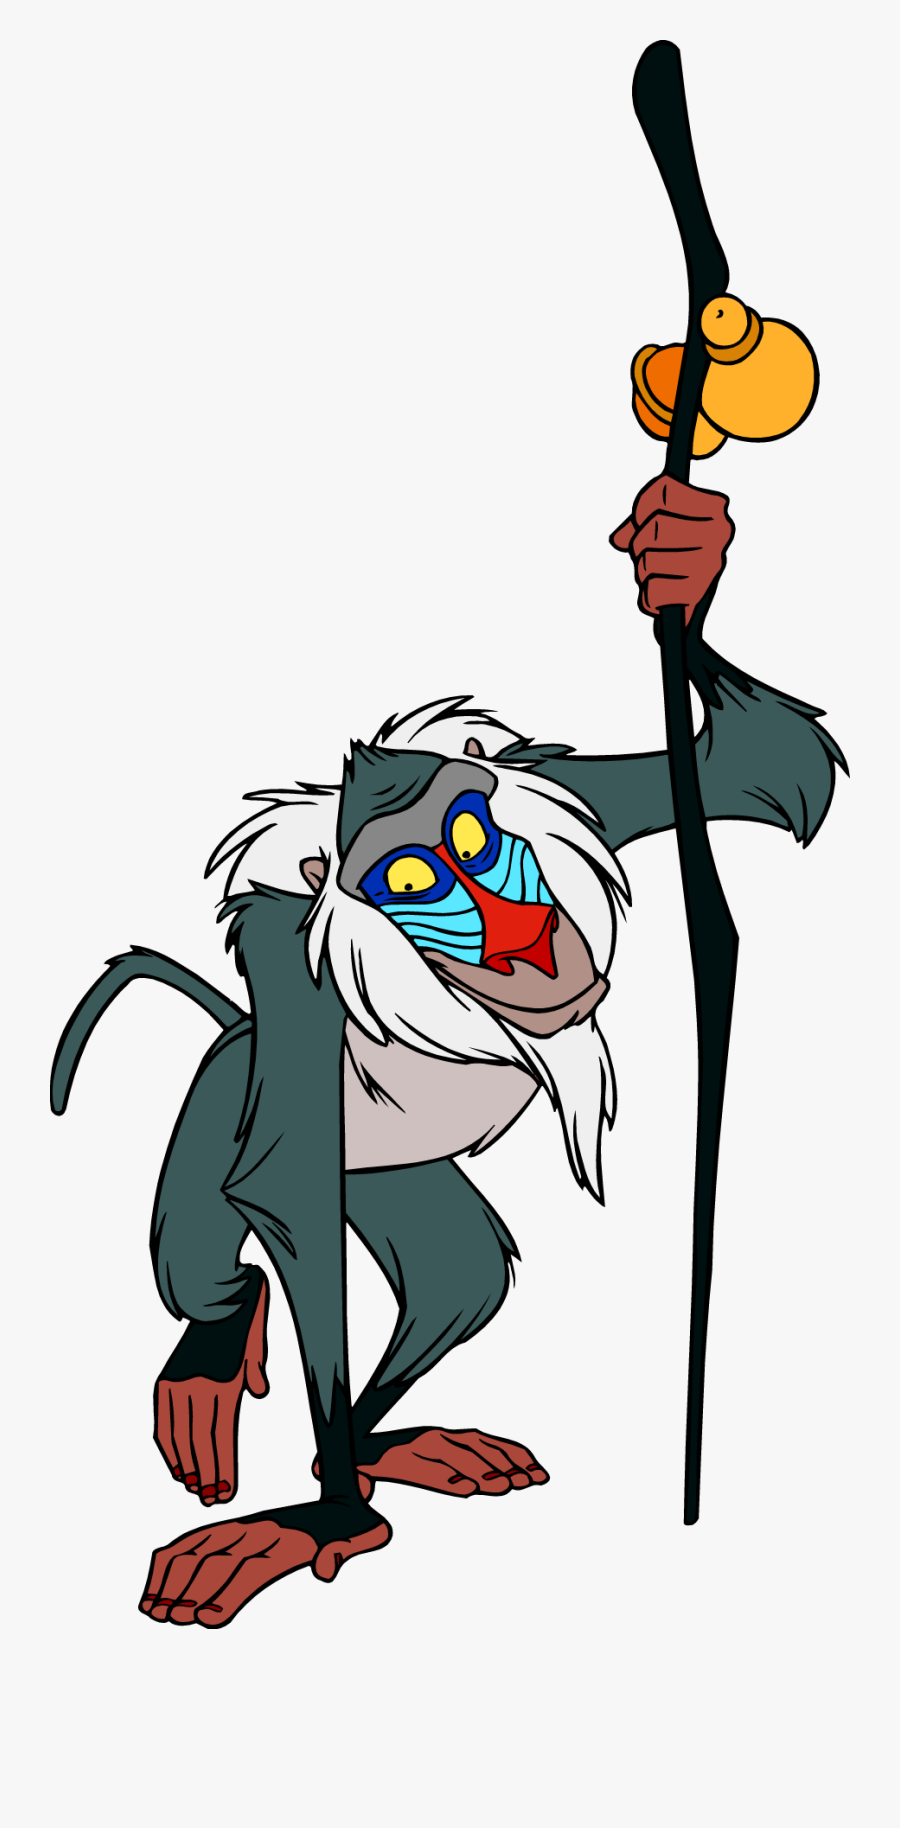 Transparent Lion King Characters Png - Lion King Characters Png, Transparent Clipart